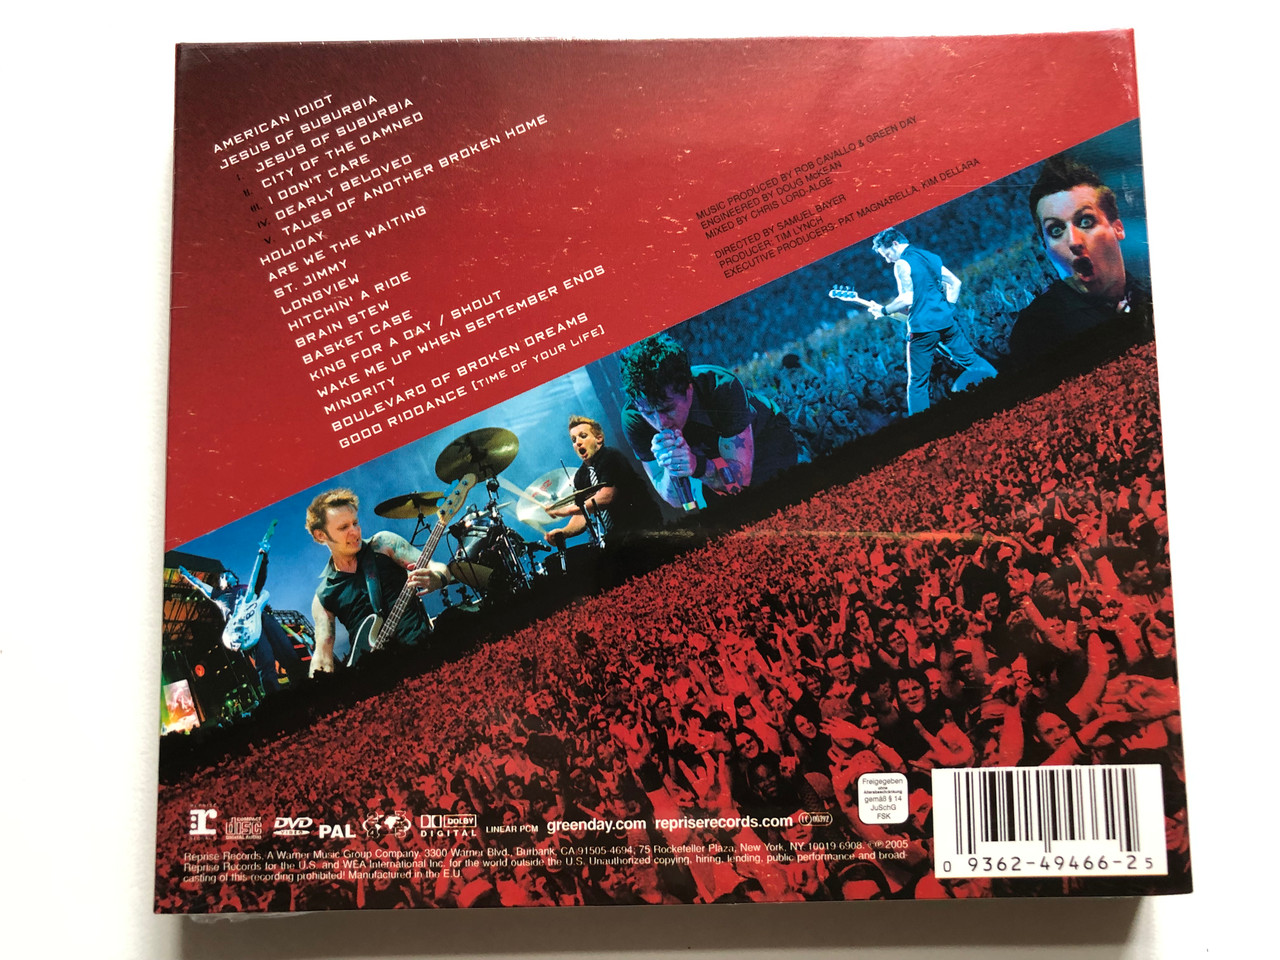 https://cdn10.bigcommerce.com/s-62bdpkt7pb/products/0/images/256070/Green_Day_Bullet_In_A_Bible_Their_first_ever_Live_CD_and_DVD_takes_you_on-stage_behind_the_scenes_includes_in-depth_interviews_of_the_American_Idiot_tour_Reprise_Records_Audio_CD_D__40077.1665593675.1280.1280.JPG?c=2&_gl=1*cli8dr*_ga*MjA2NTIxMjE2MC4xNTkwNTEyNTMy*_ga_WS2VZYPC6G*MTY2NTU4NTUzOC41OTAuMS4xNjY1NTkzNDIyLjU4LjAuMA..